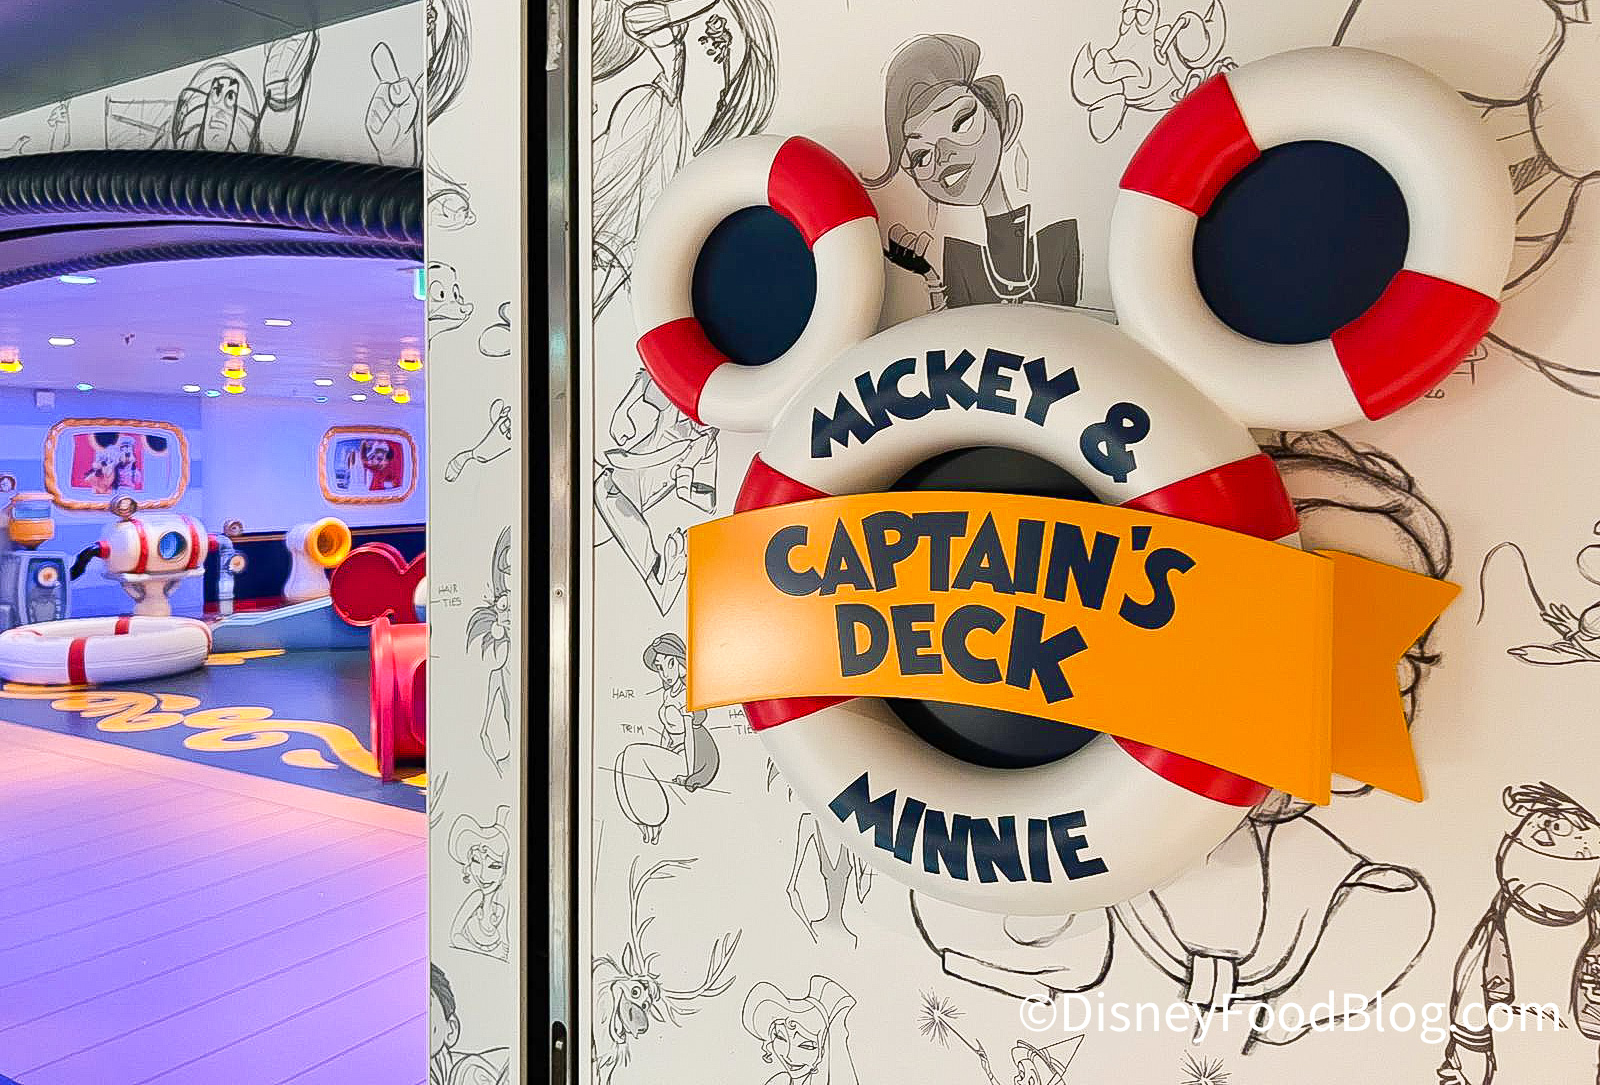 Disney cruise kids clubs: What to know about the Oceaneer Club - The Points  Guy